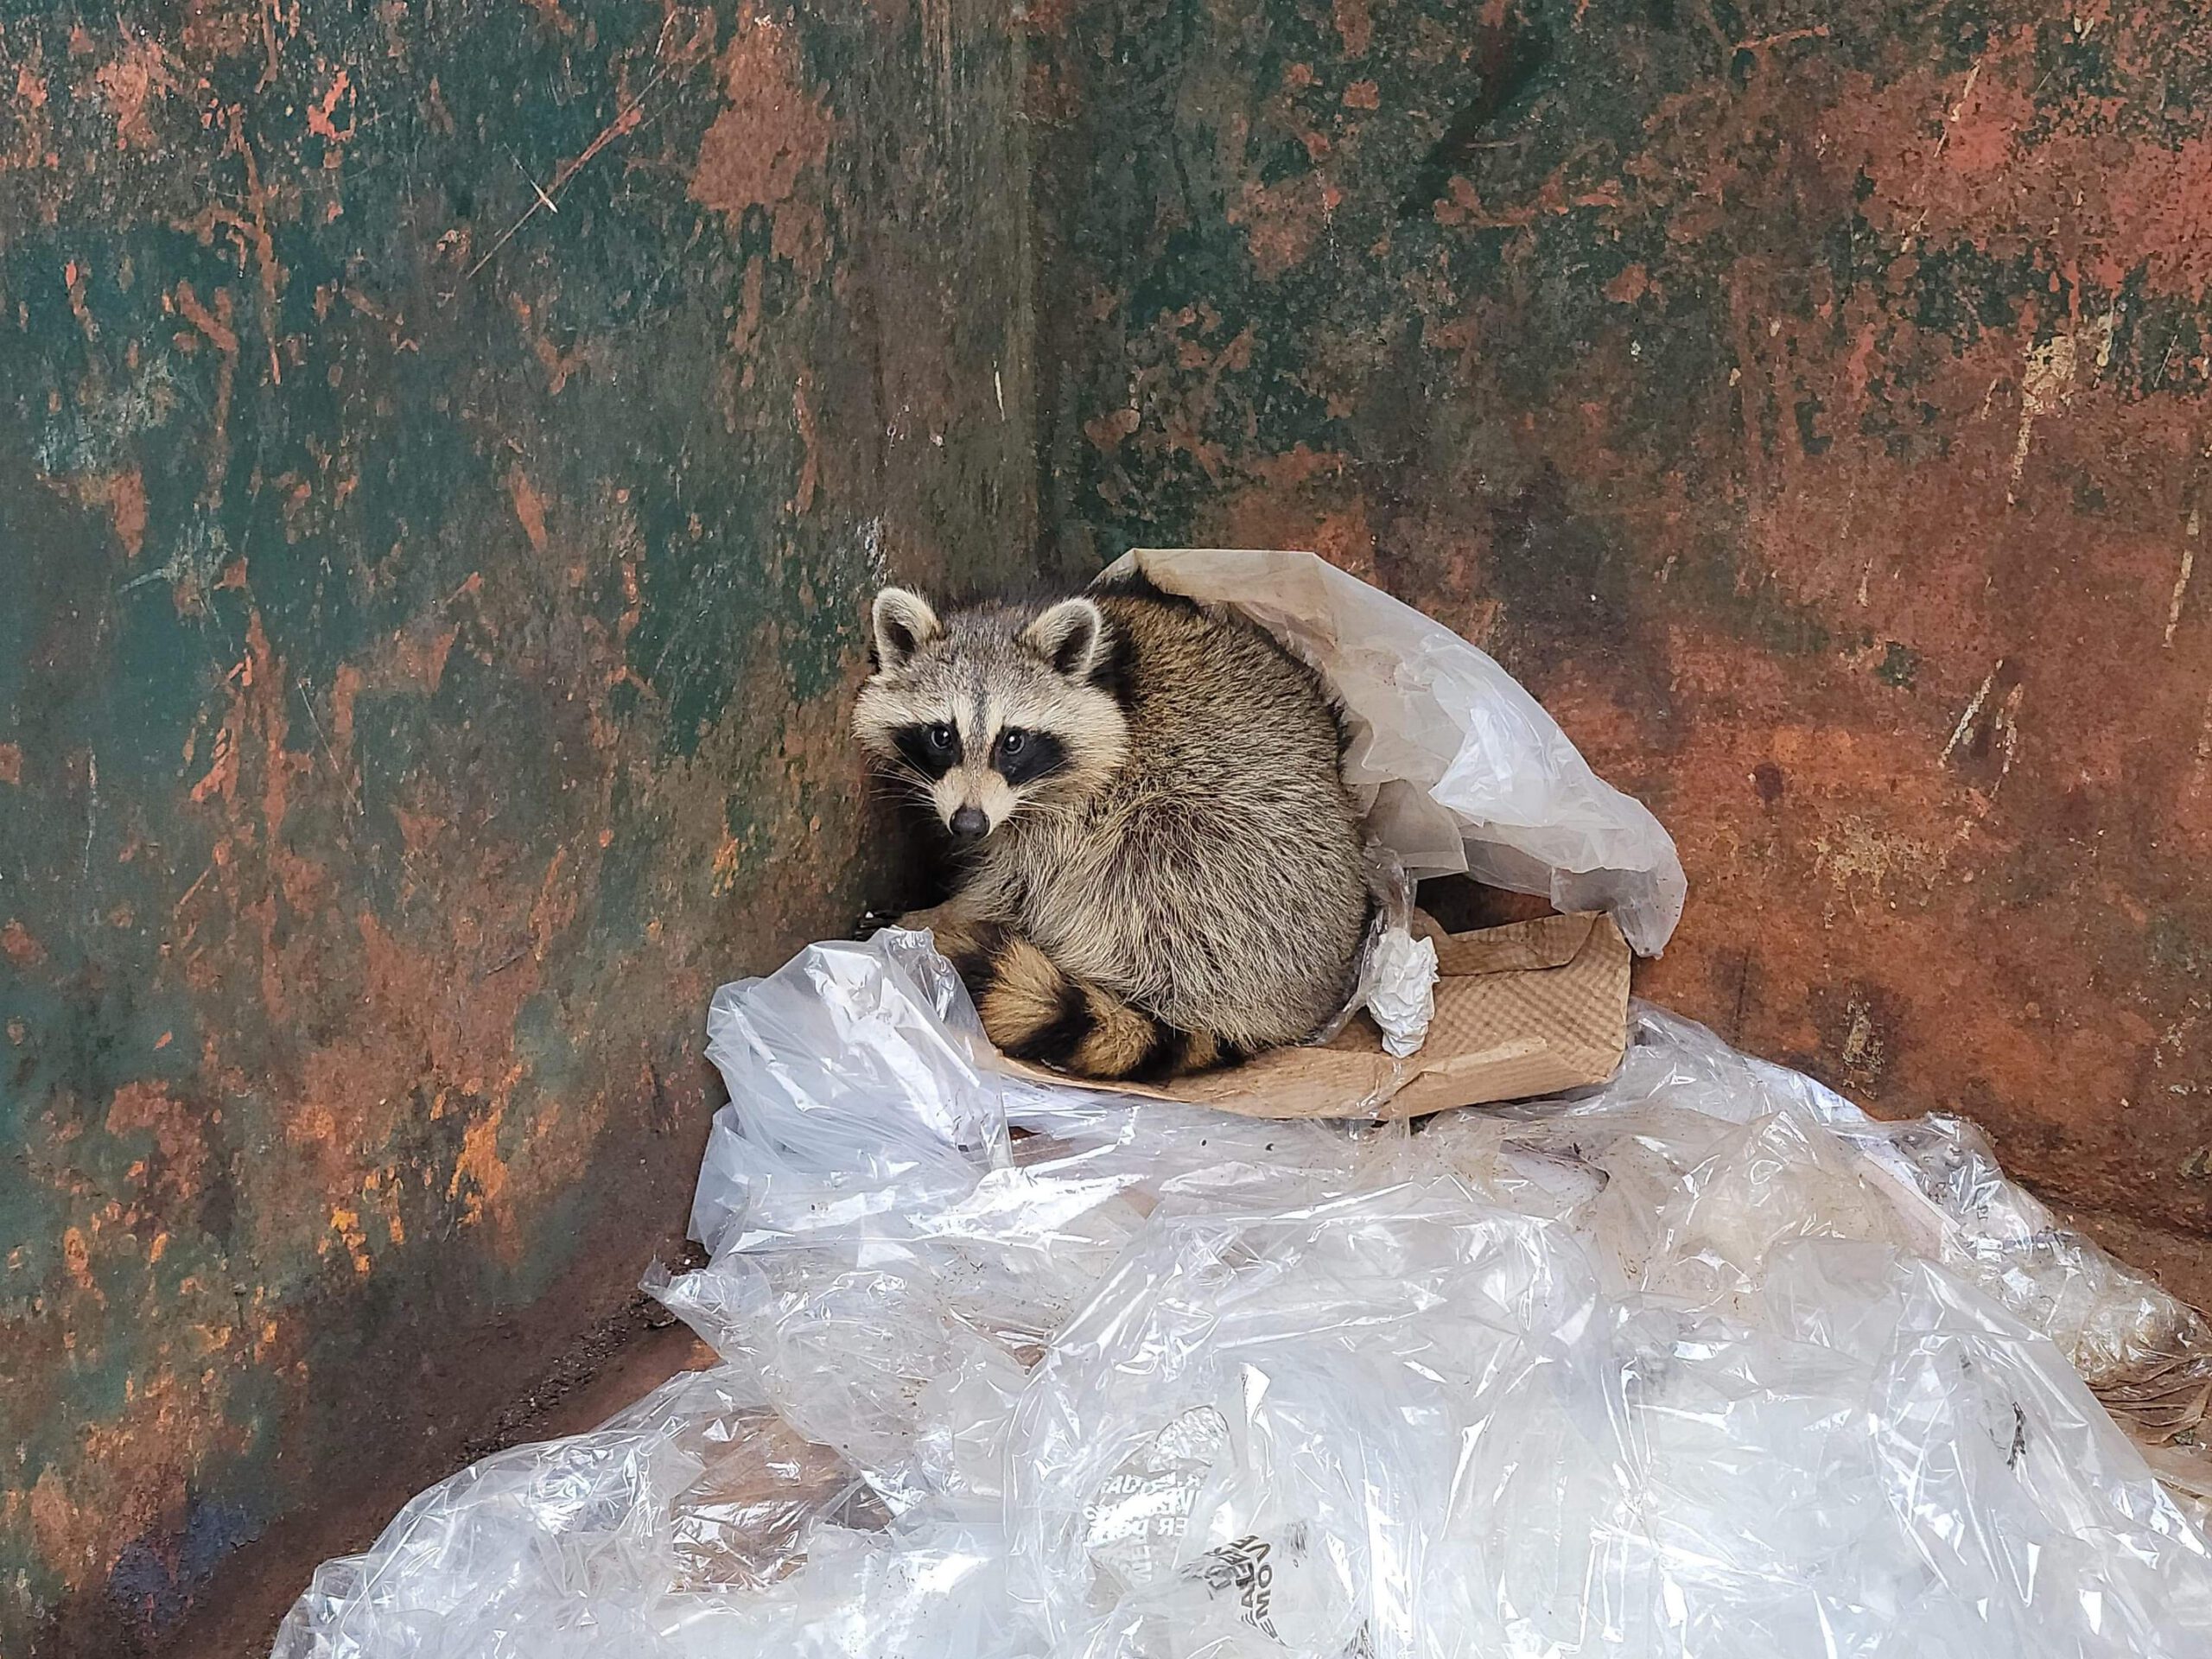 What should you do to prevent a pest infestation of an outdoor dumpster?